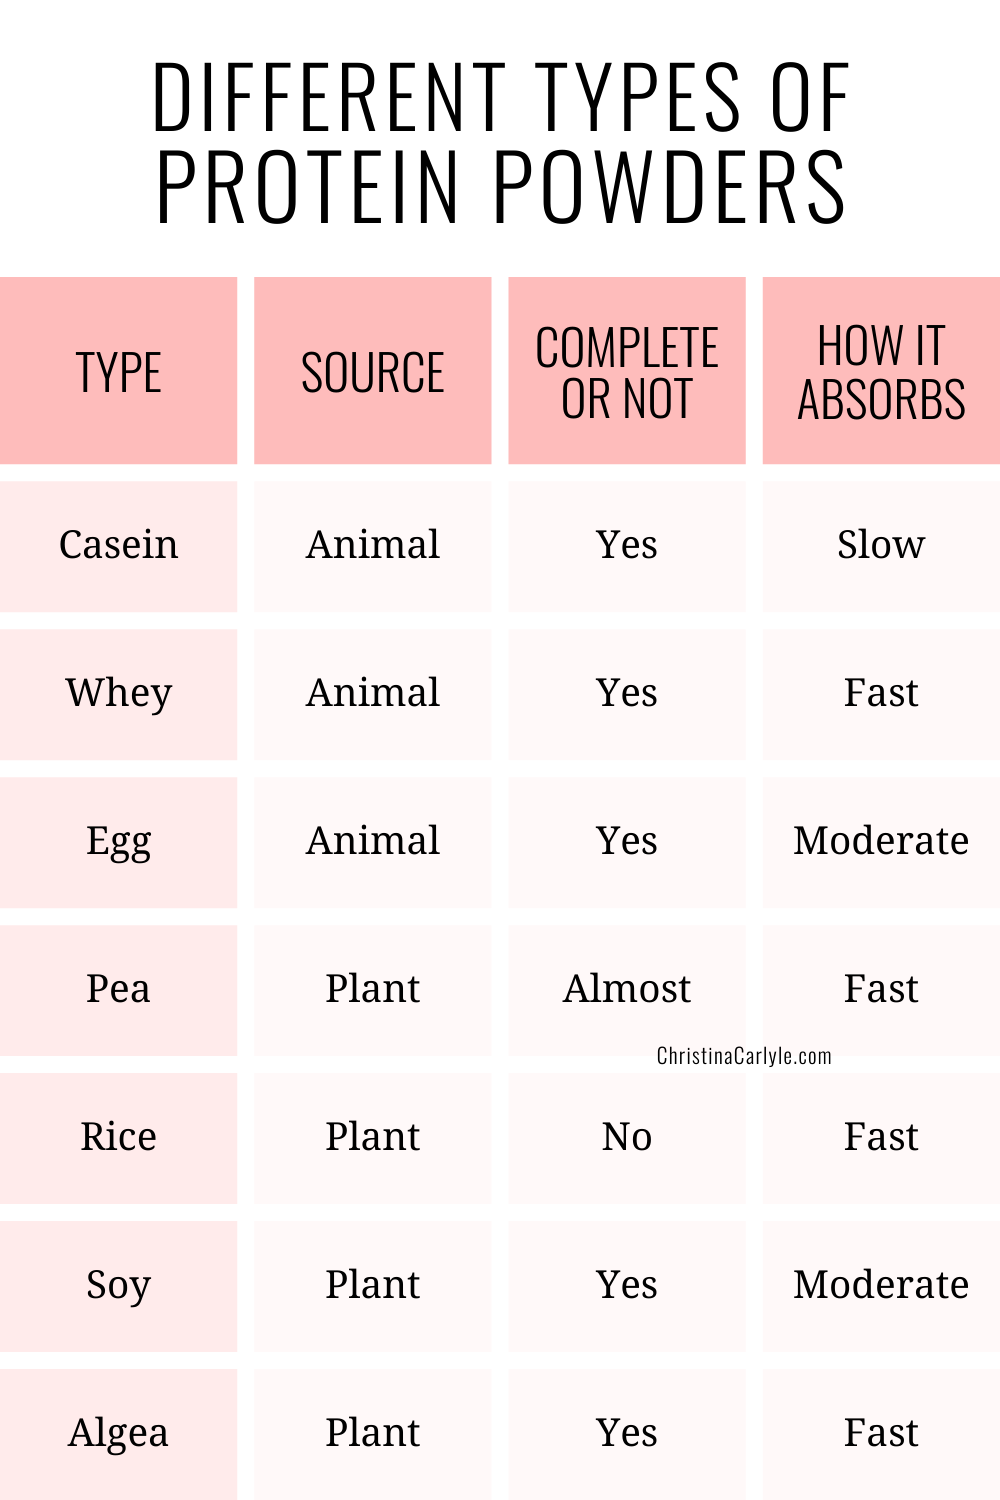 a chart comparing different types of protein powders, their sources, if they're complete proteins, and how they absorb